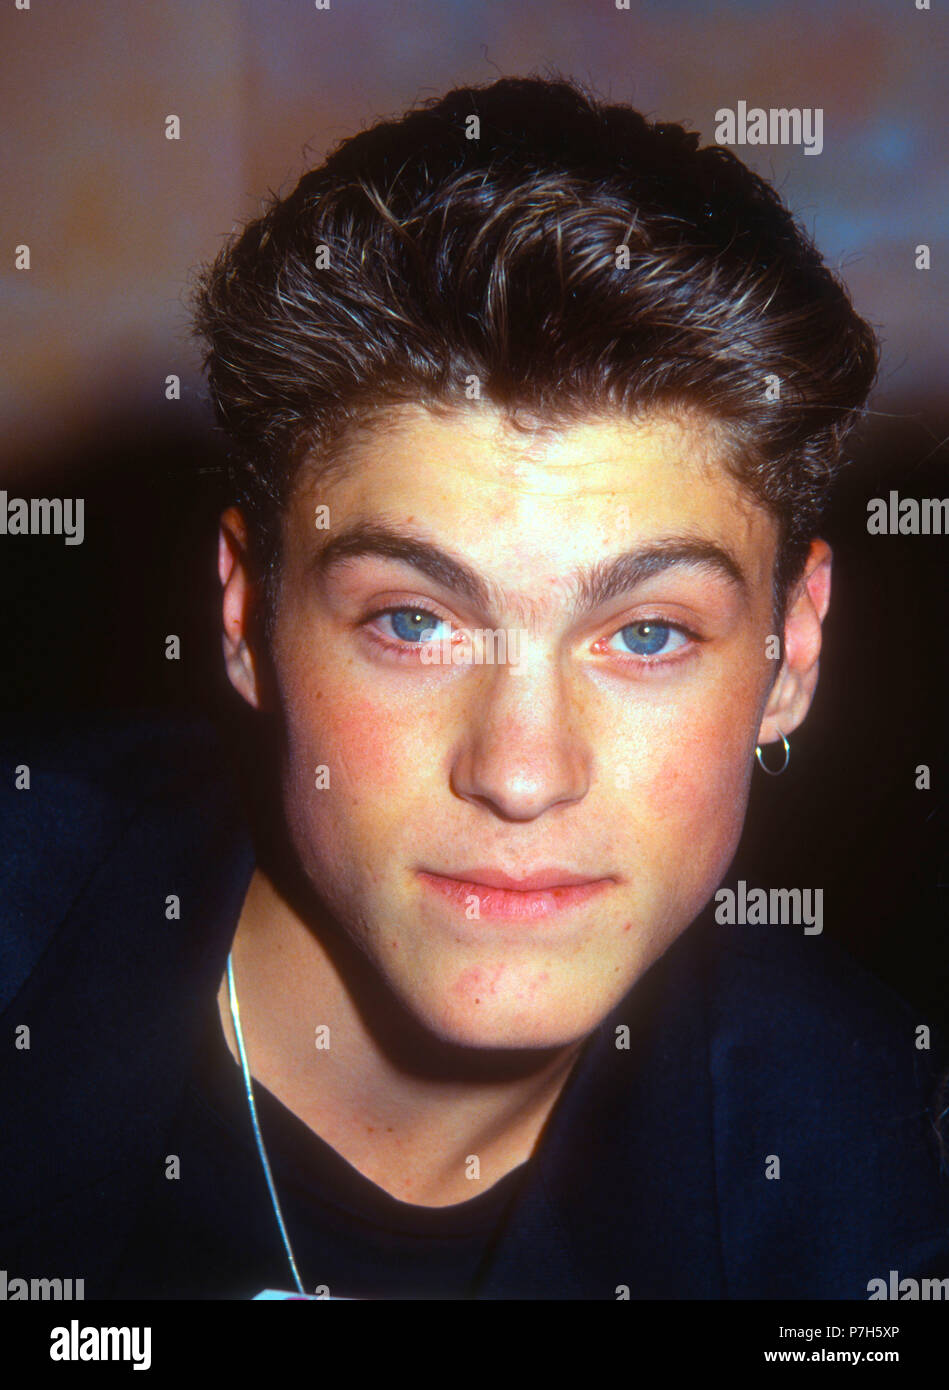 NORTHRIDGE, CA - JANUARY 25: Actor Brian Austin Green attends the launch of the release of 'Beverly Hills, 90210' series pilot on video on January 25, 1992 at the Wherehouse in Northridge, California. Photo by Barry King/Alamy Stock Photo Stock Photo